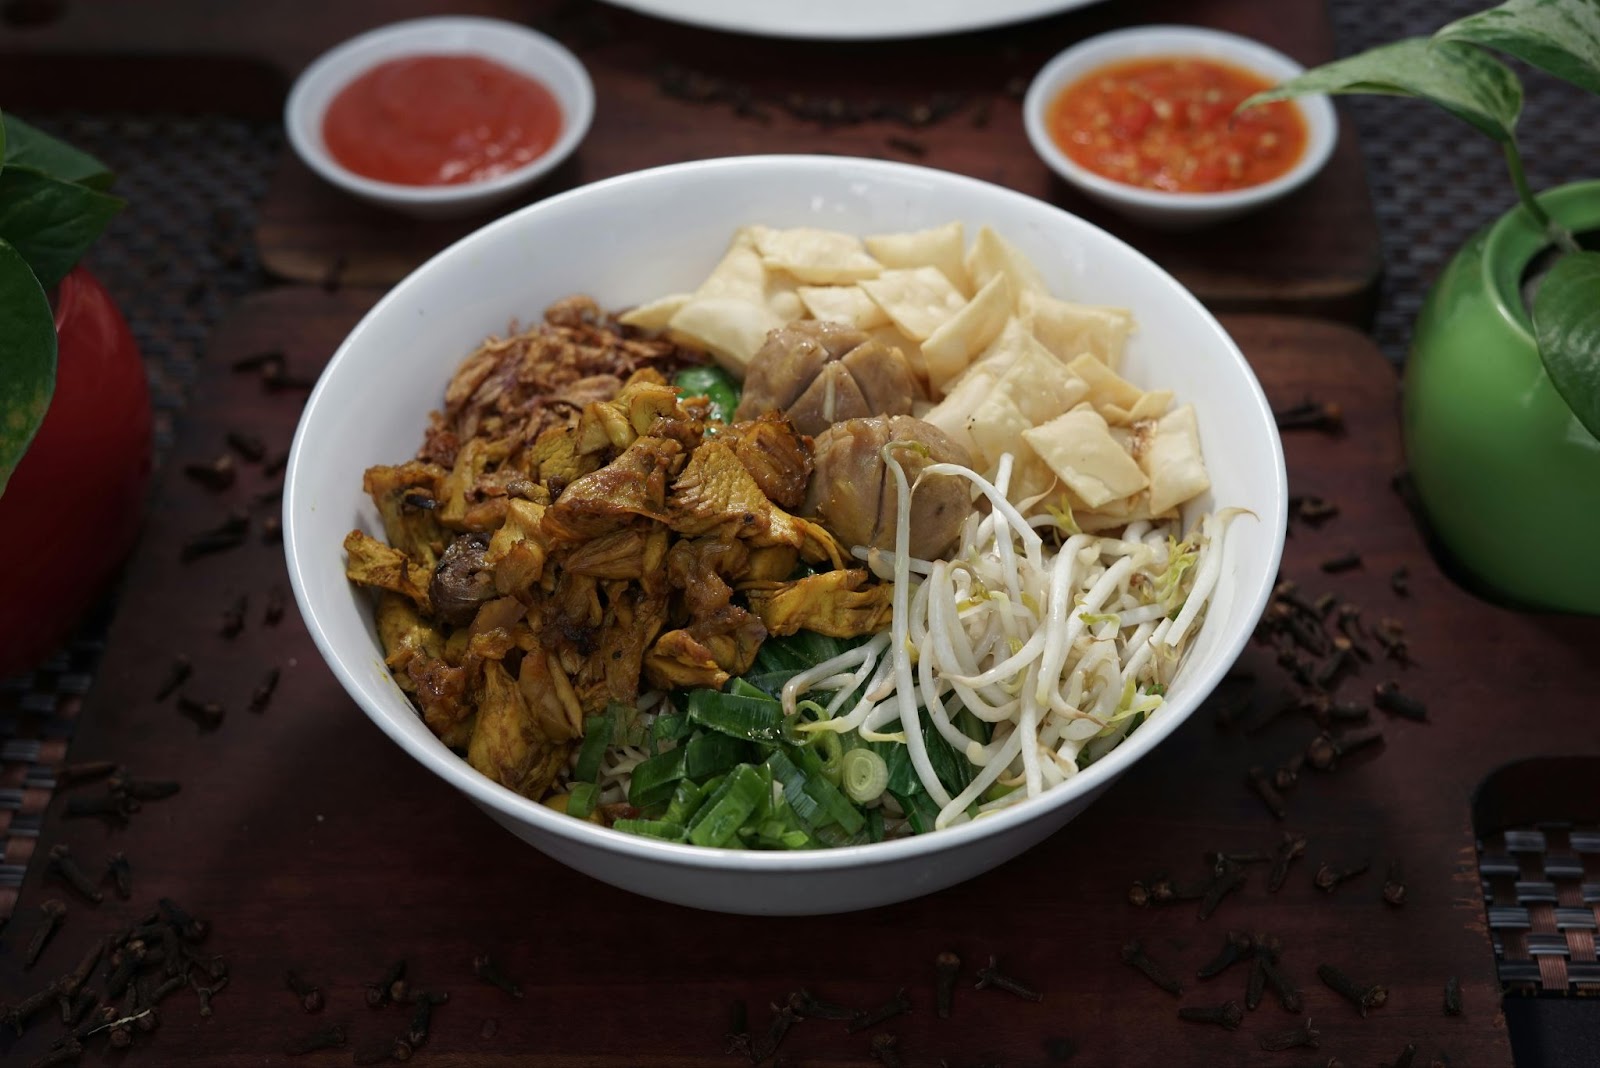 Indonesian Food on a Ceramic Bowl